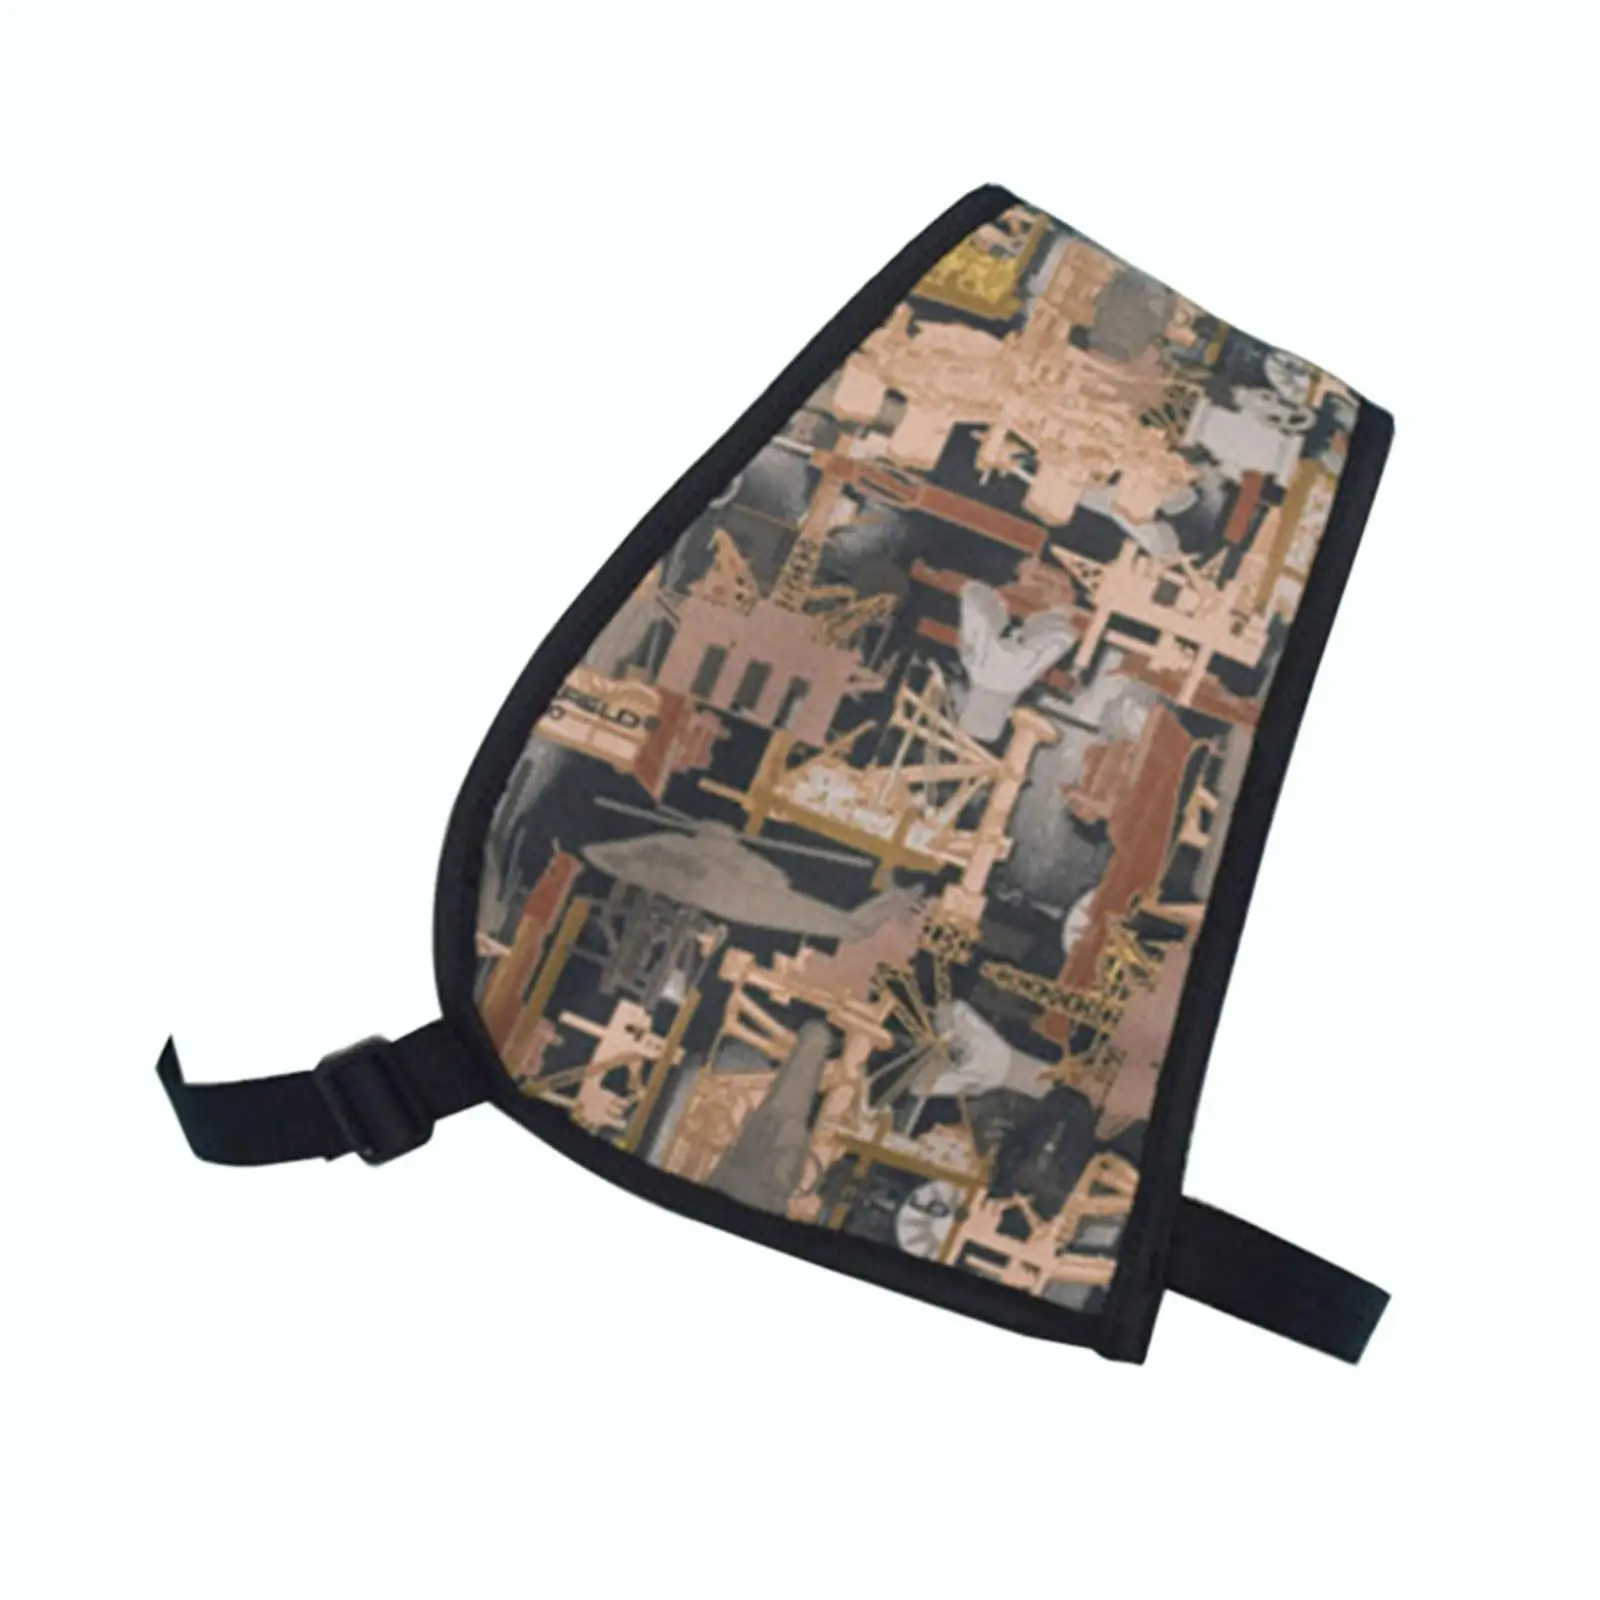 Slip on Pad, Adjustable Anti Shock Protective Pad, Protective Shoulder Pad for Range, Hunting, Outdoor